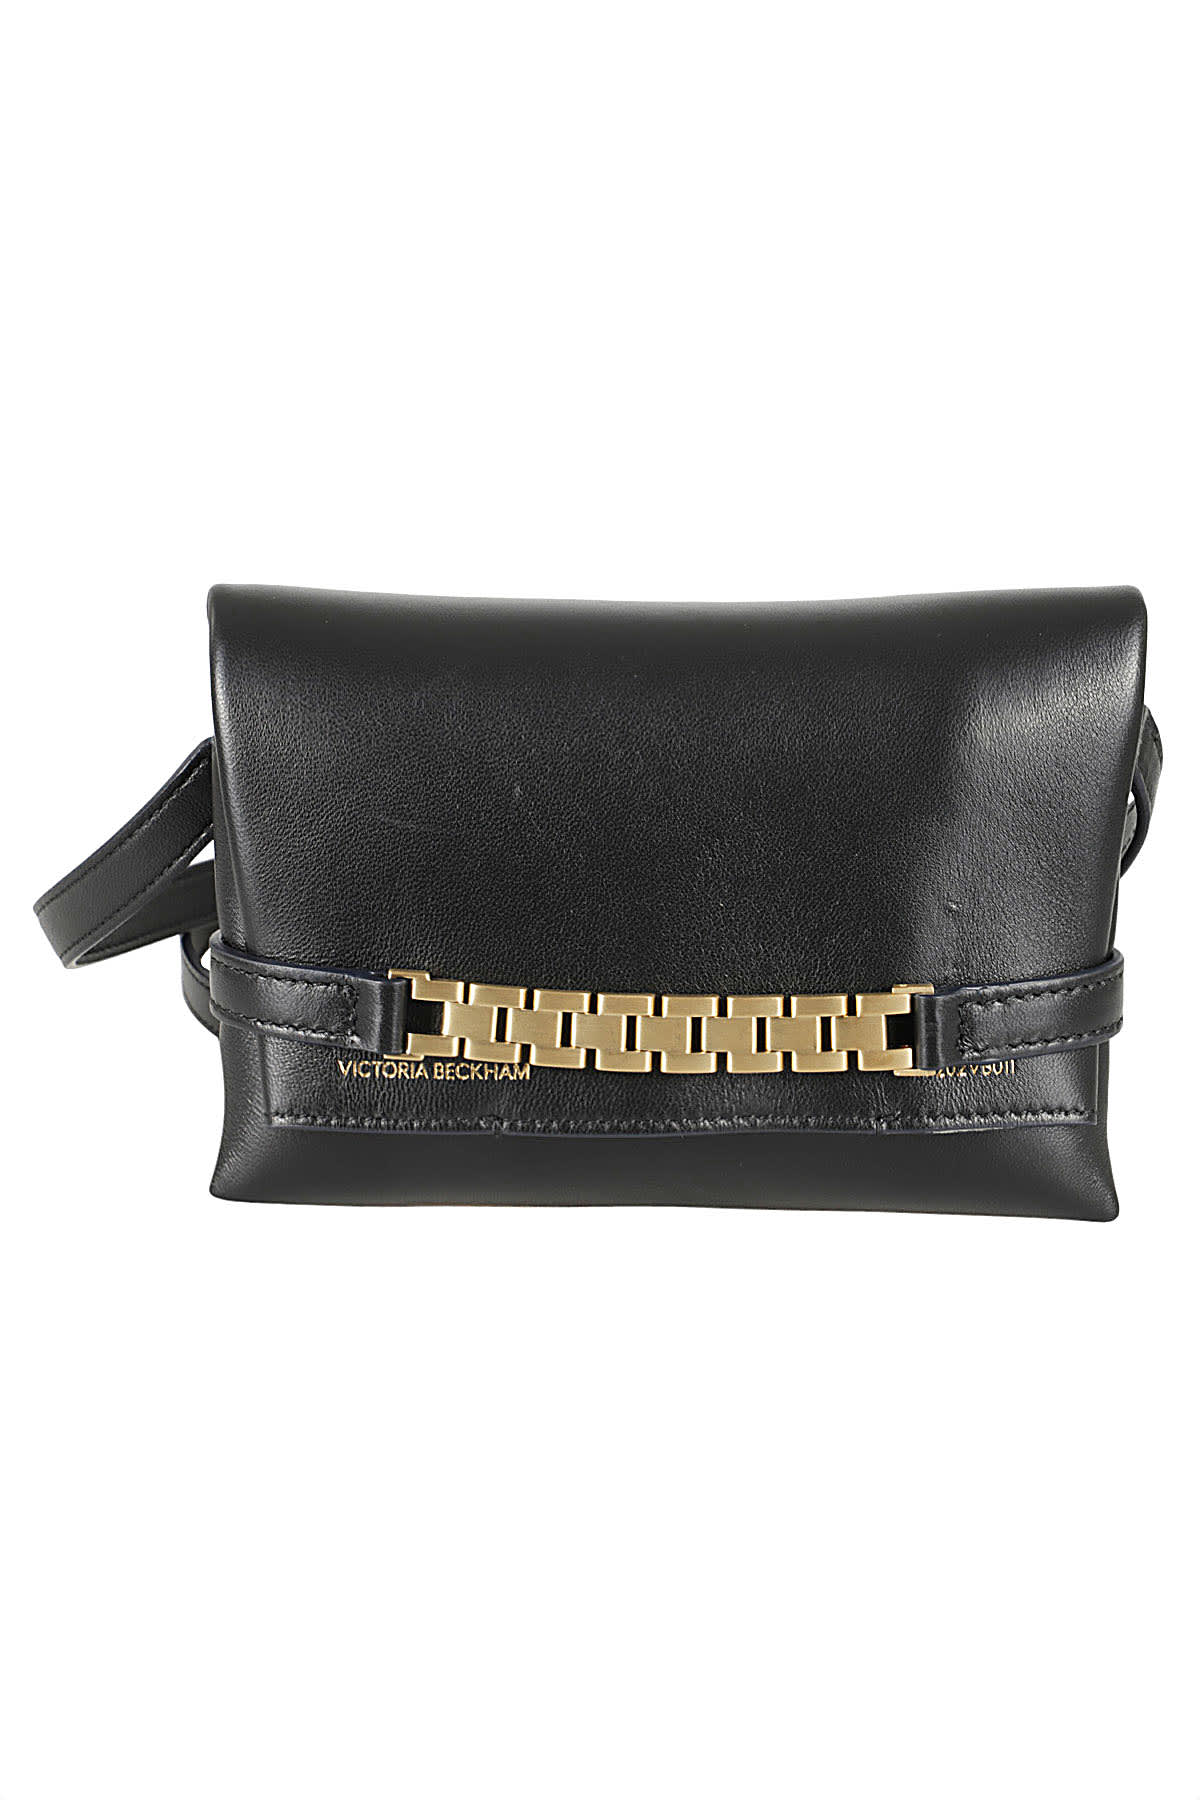 Victoria Beckham Mini Pouch With Long Strap In Black